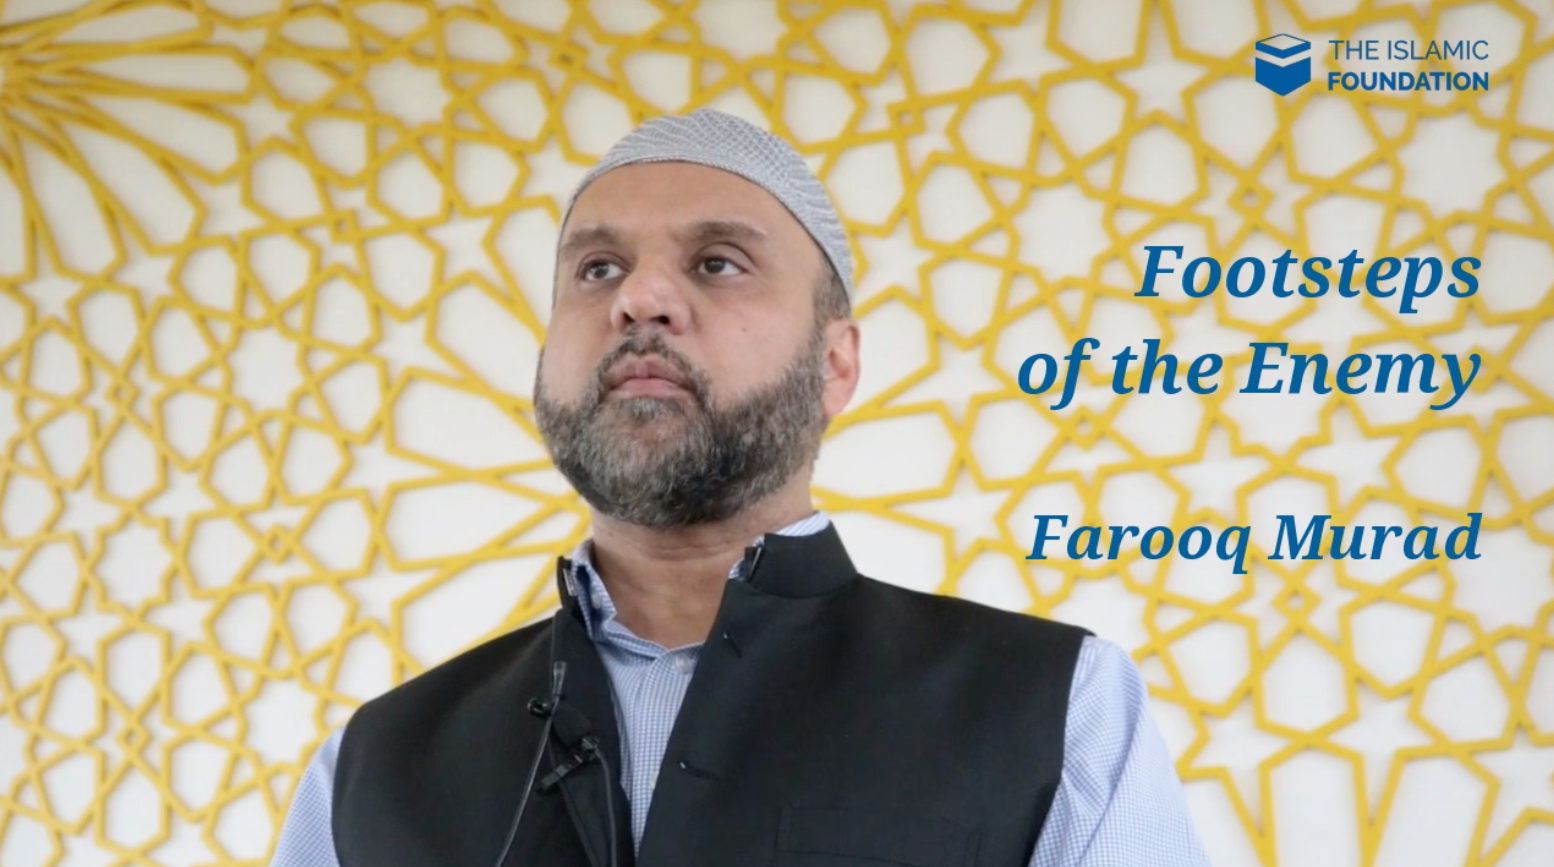 Footsteps of the Enemy. Friday Khutbah by Farooq Murad 